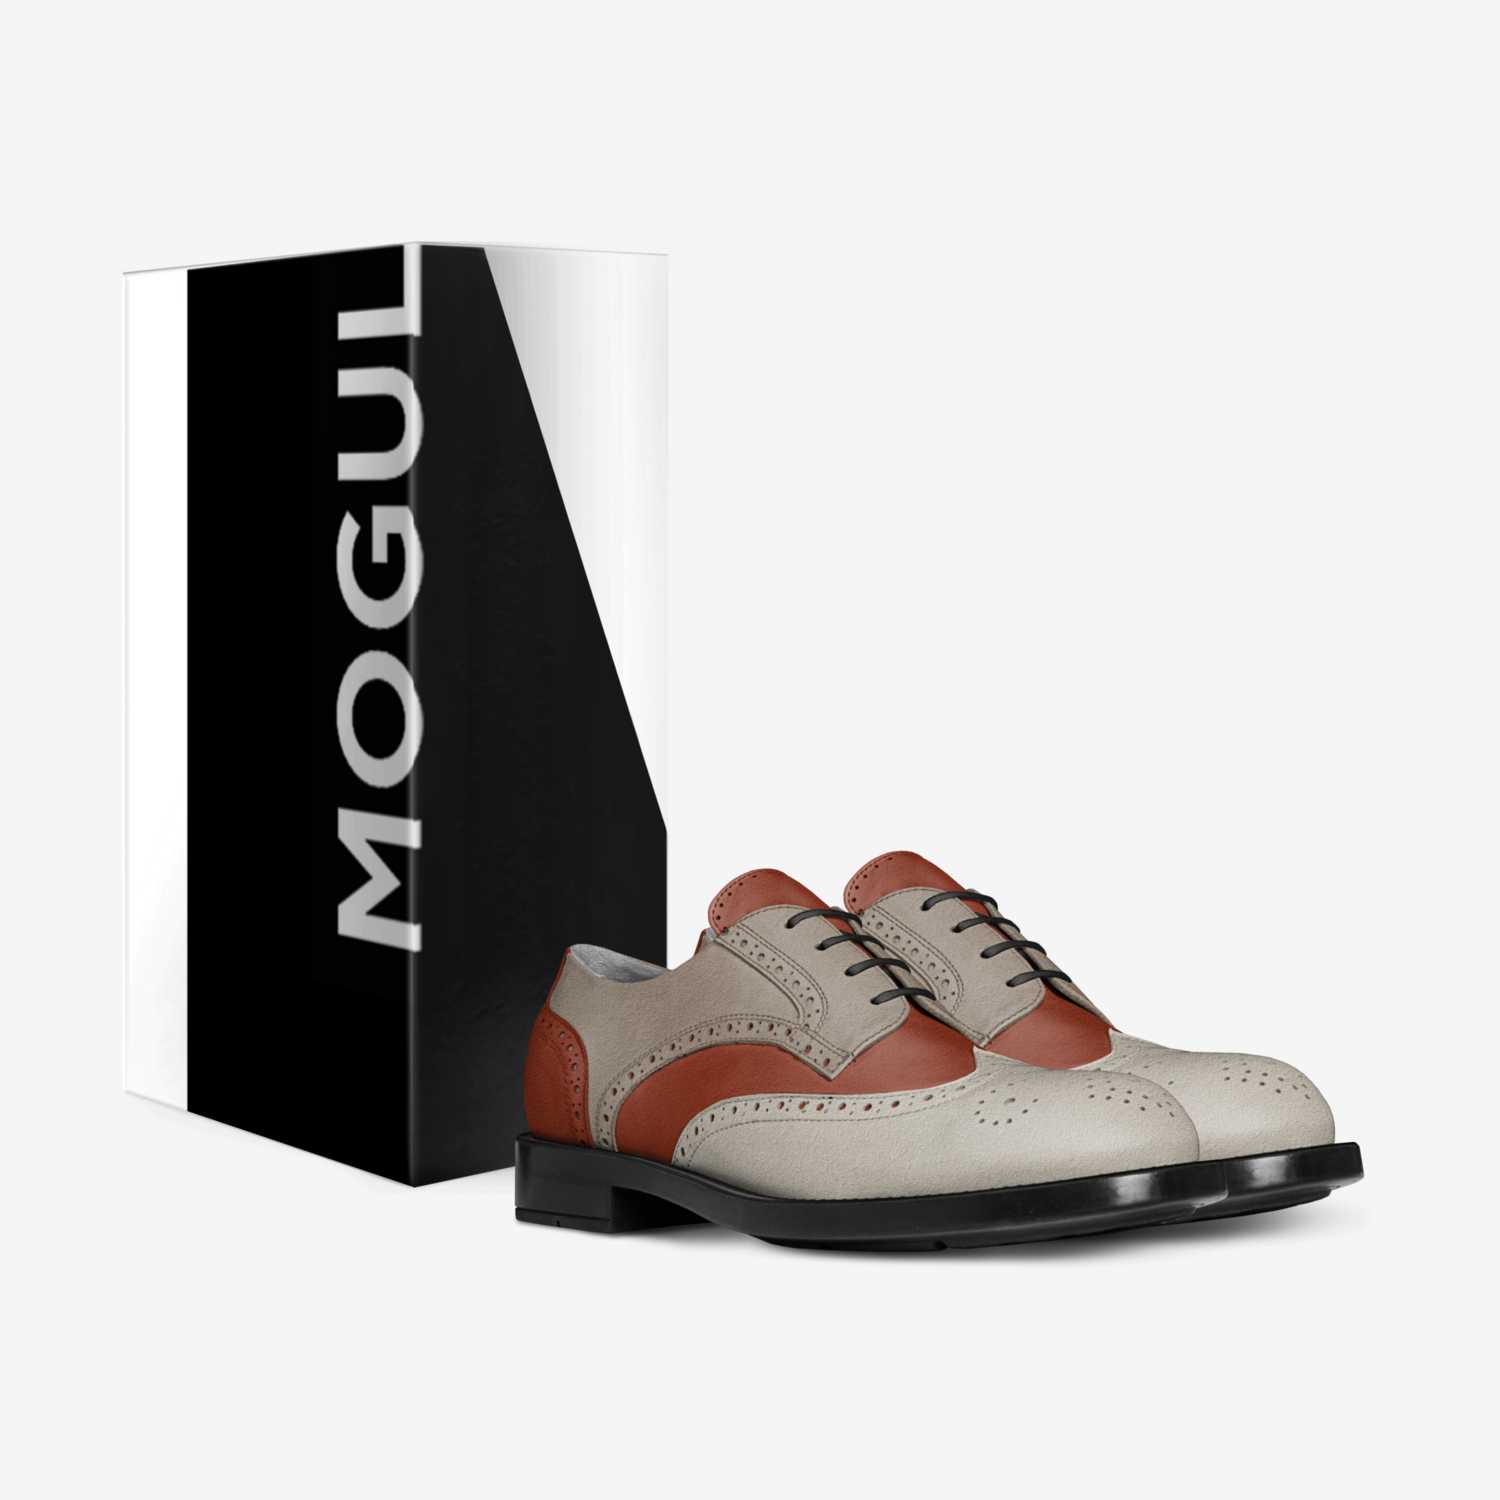 Mogul custom made in Italy shoes by Patrick Collins | Box view